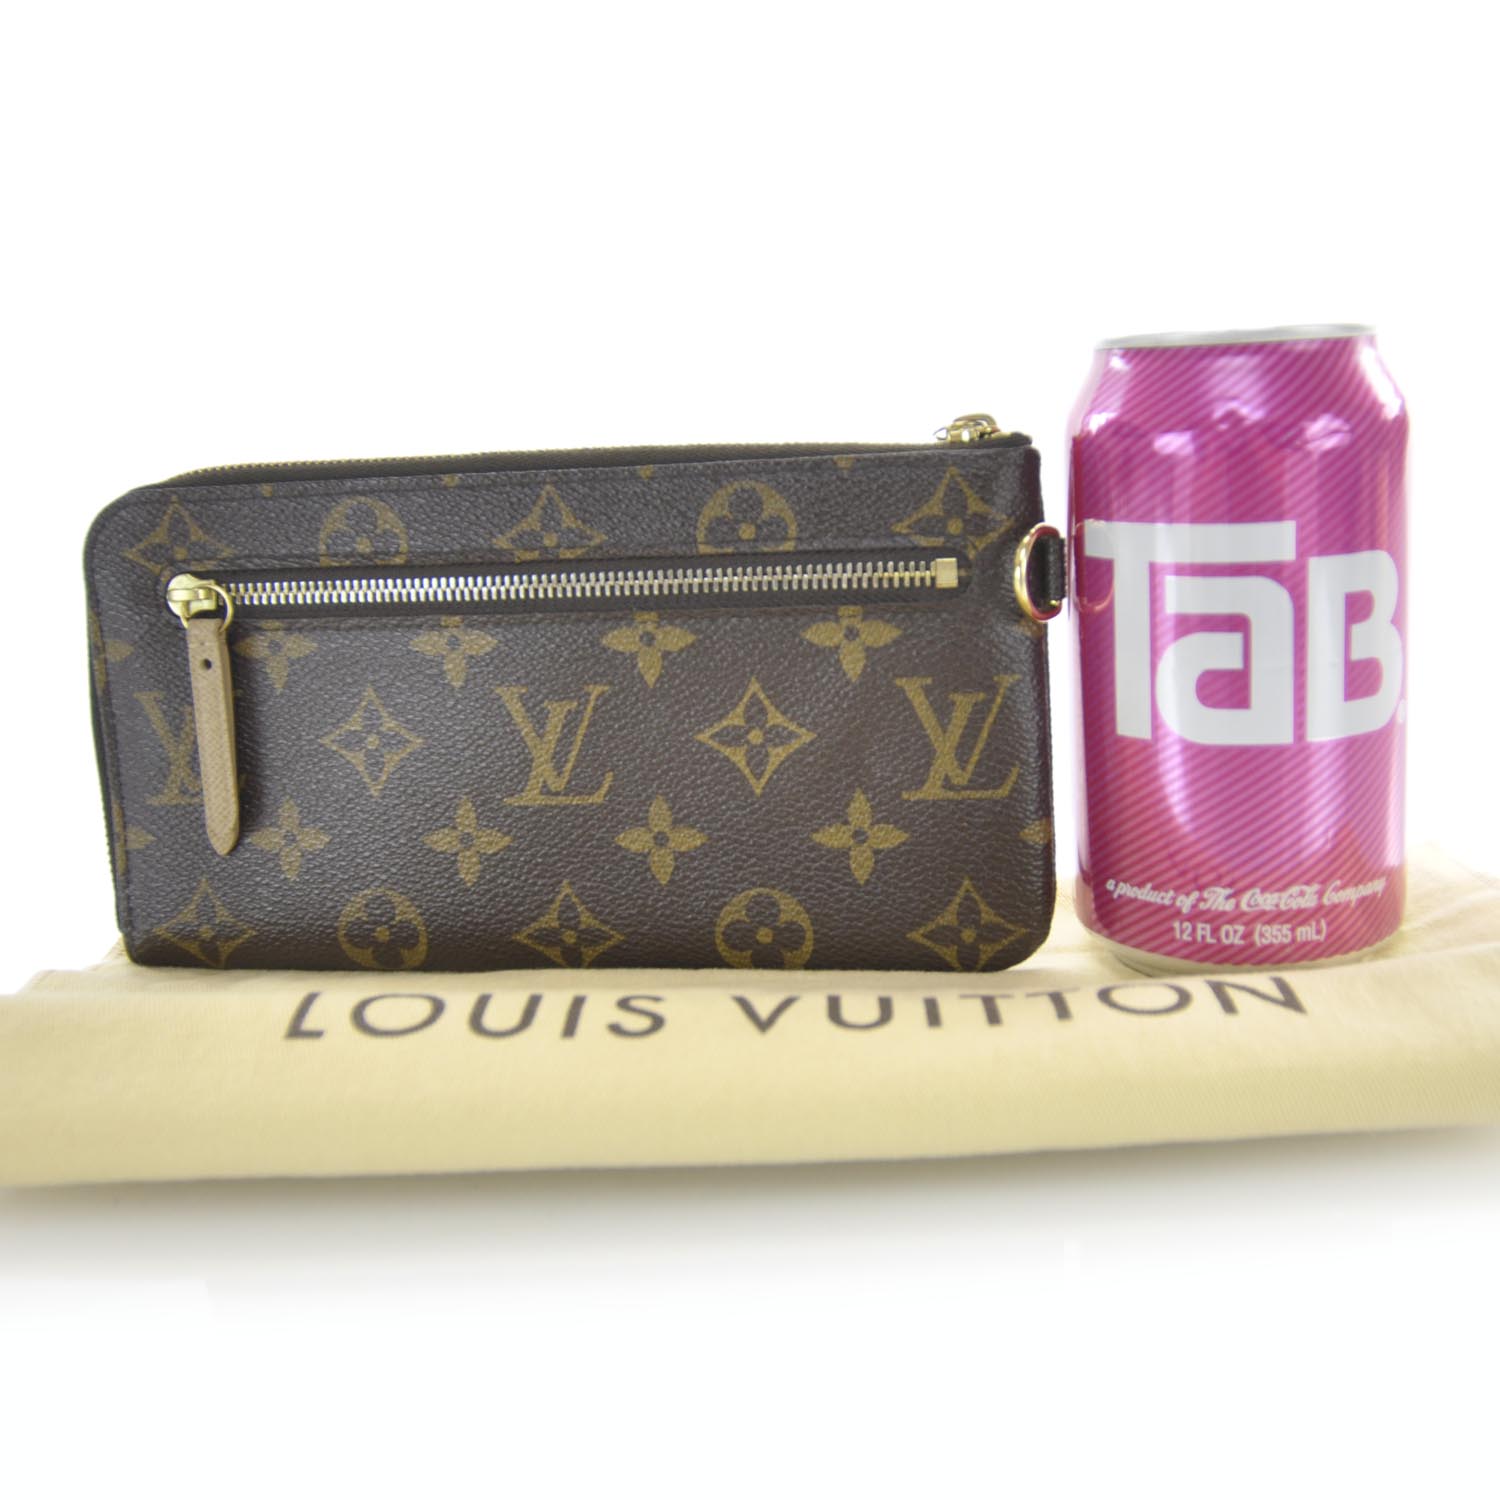 LOUIS VUITTON Complice Trunks and Bags Wallet Beige 33369